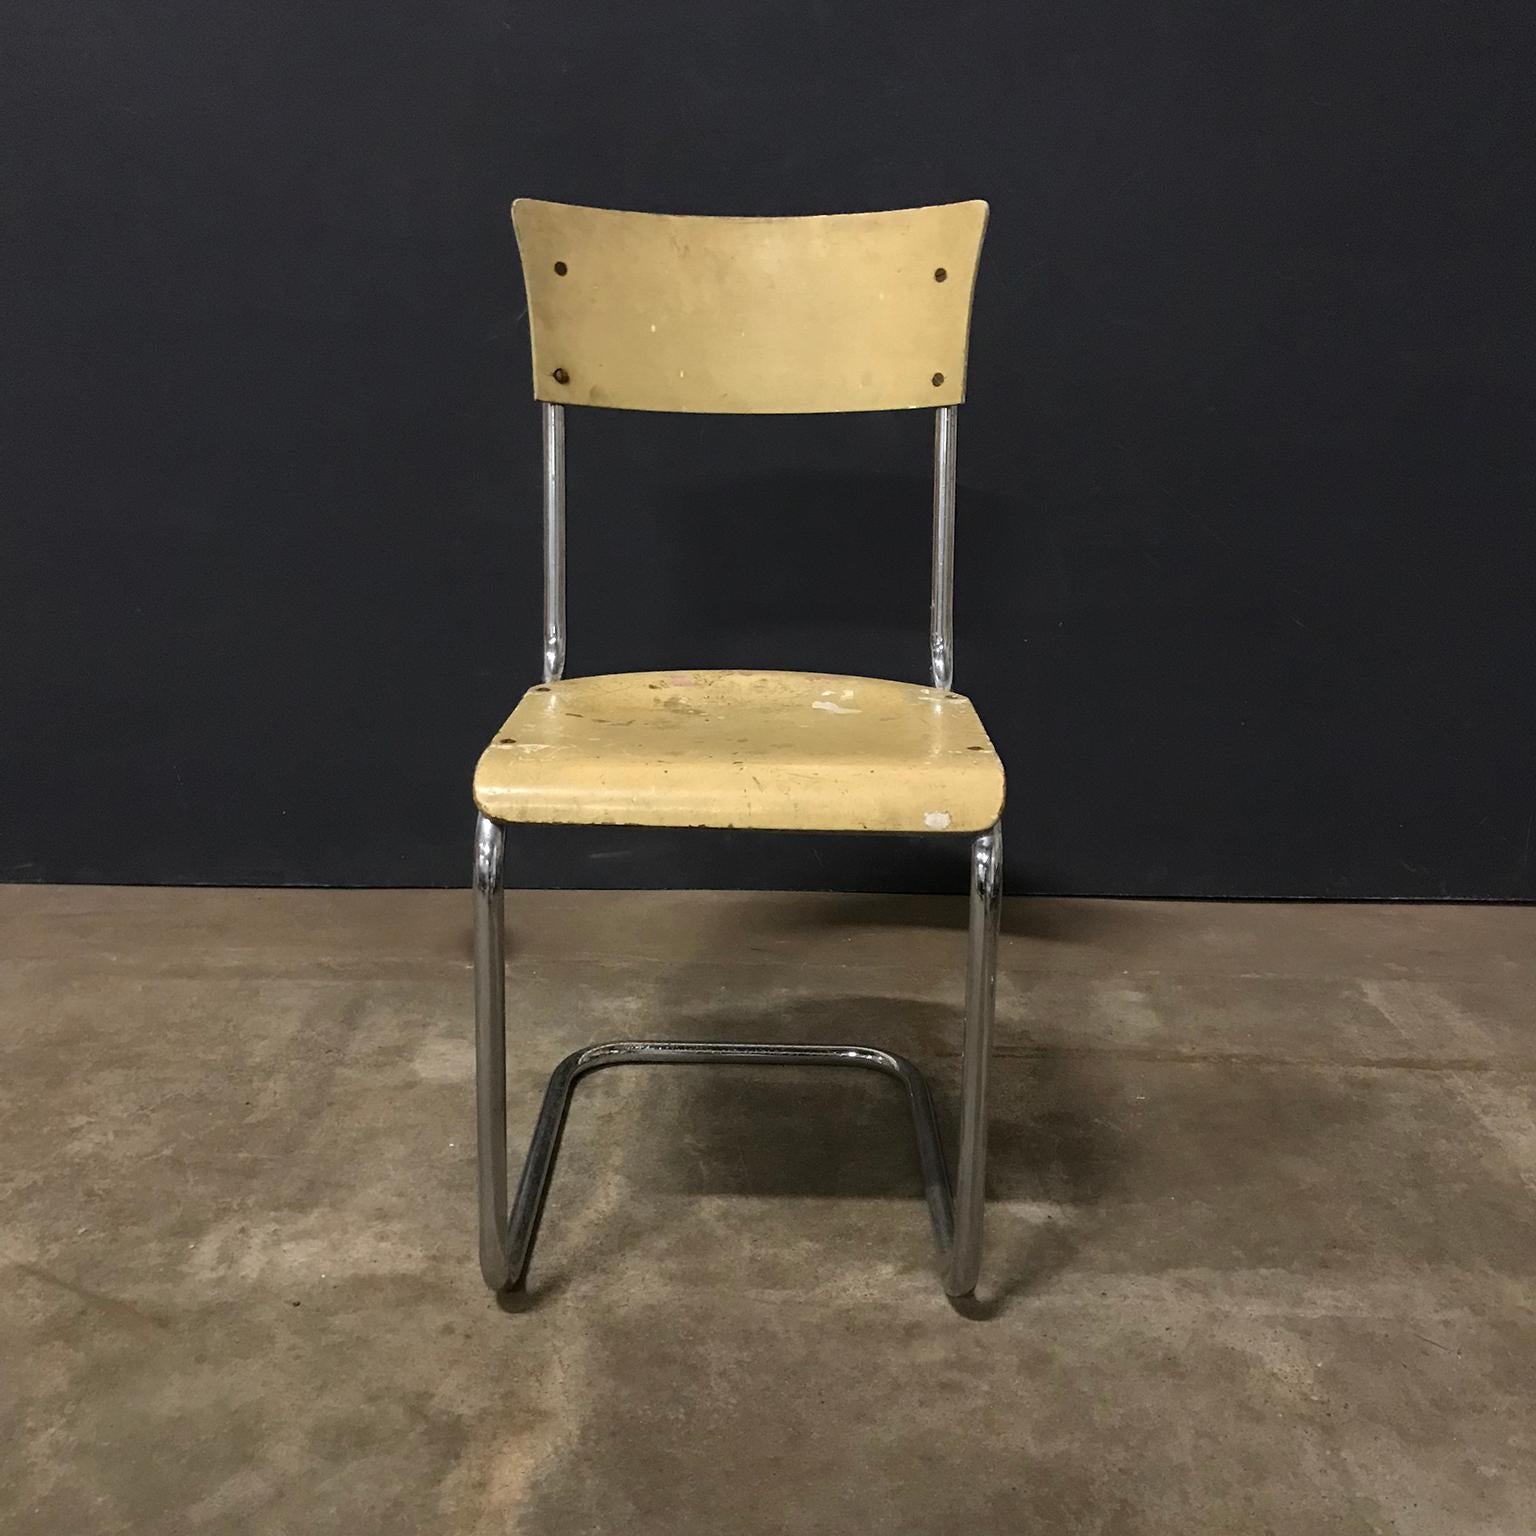 1931, Mart Stam for Thonet, Set of Light Yellow Wooden S43 In Good Condition For Sale In Amsterdam IJMuiden, NL